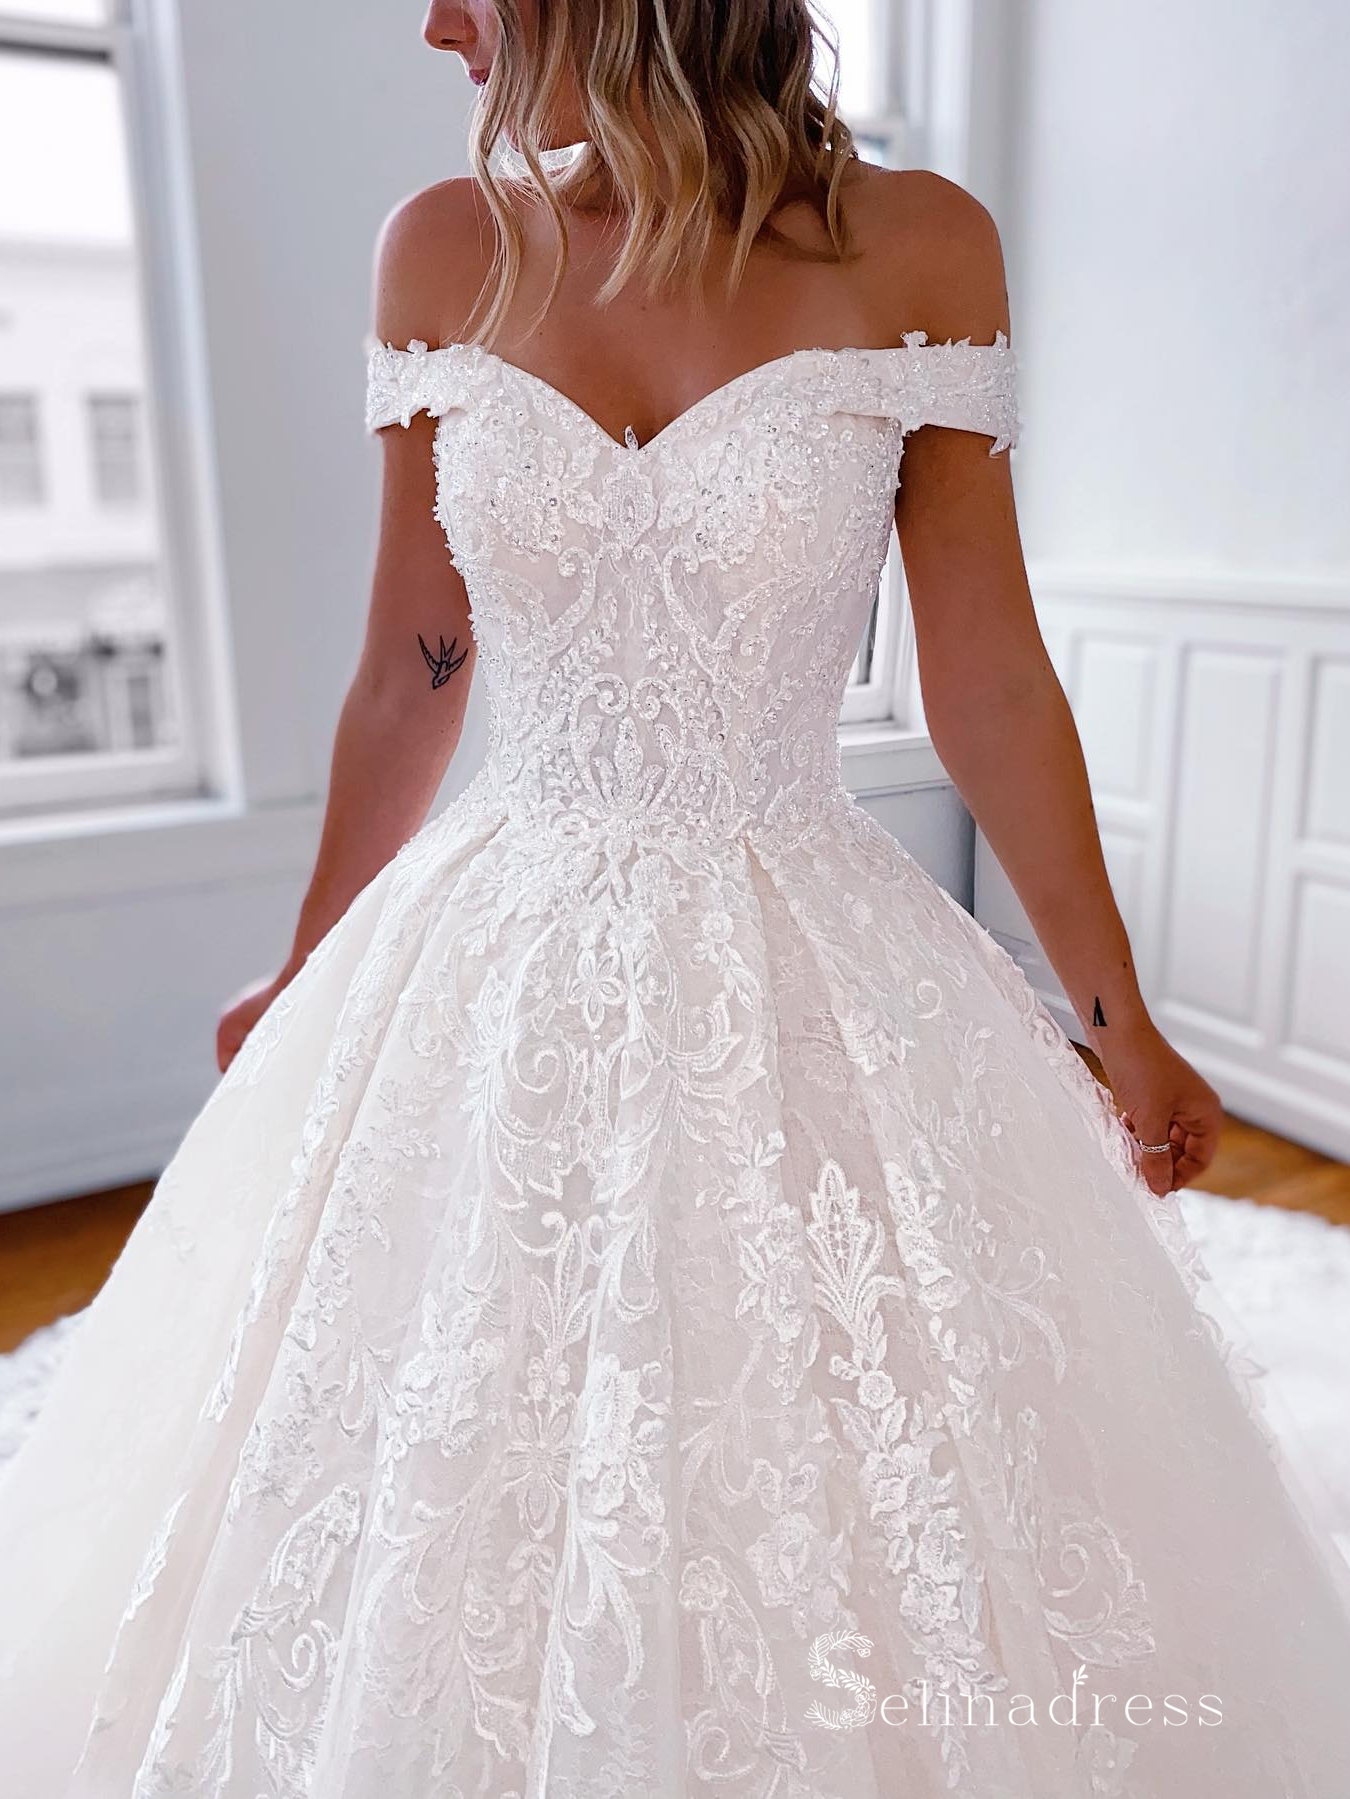 Wedding Dresses & Bridal Gowns | Maggie Sottero | Maggie Sottero